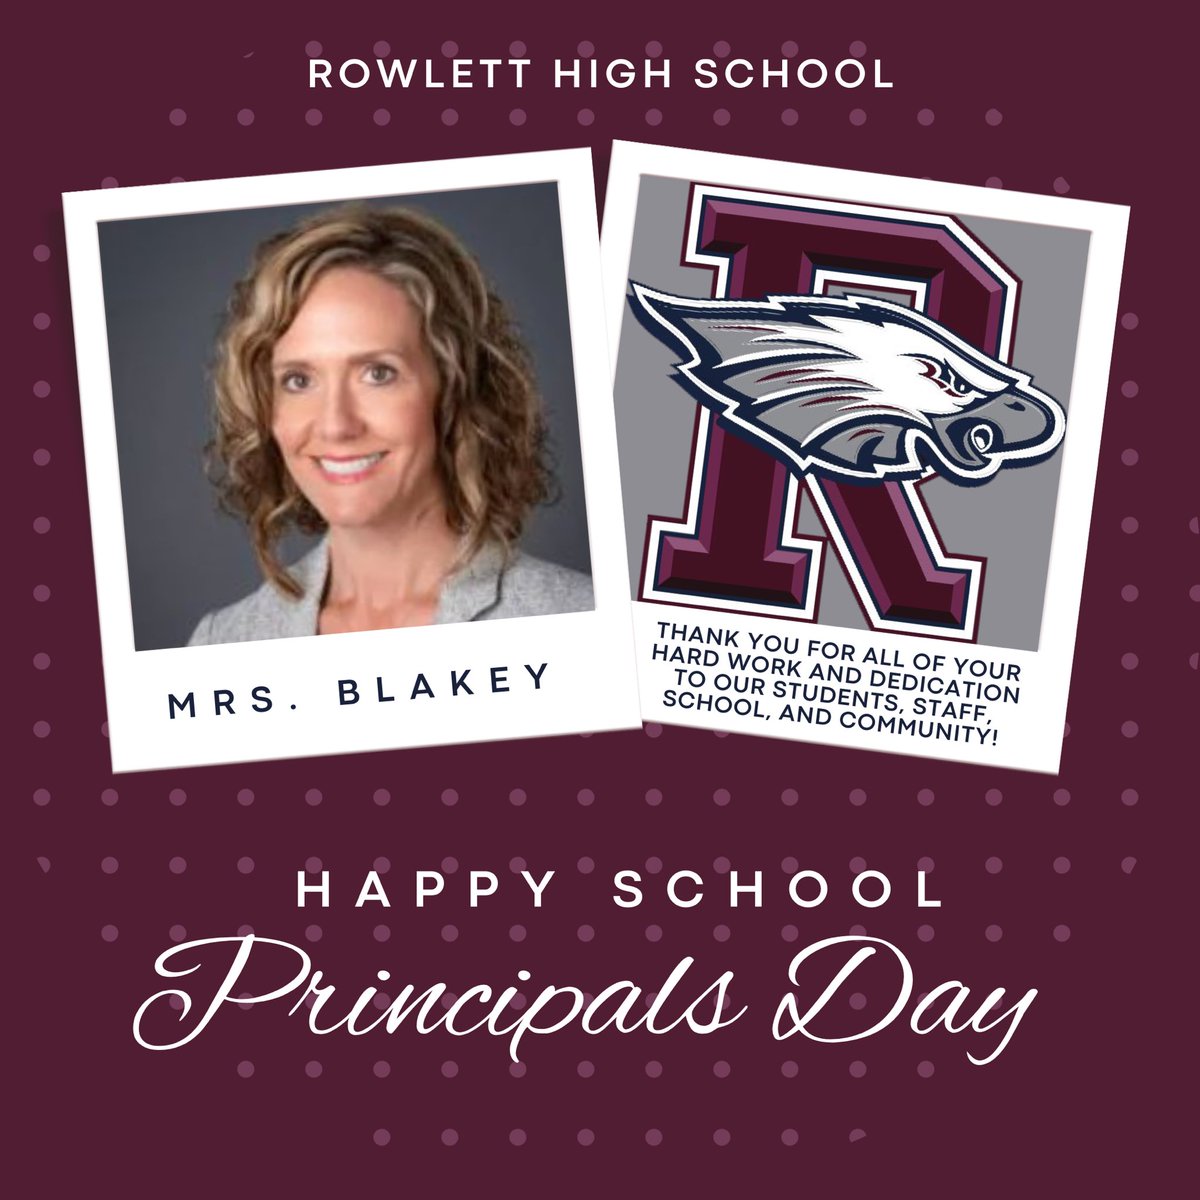 Happy School Principal Day, Mrs. Blakey! We want to express our gratitude for your dedication and hard work in supporting our students, staff, parents, campus, and community. #WeROne